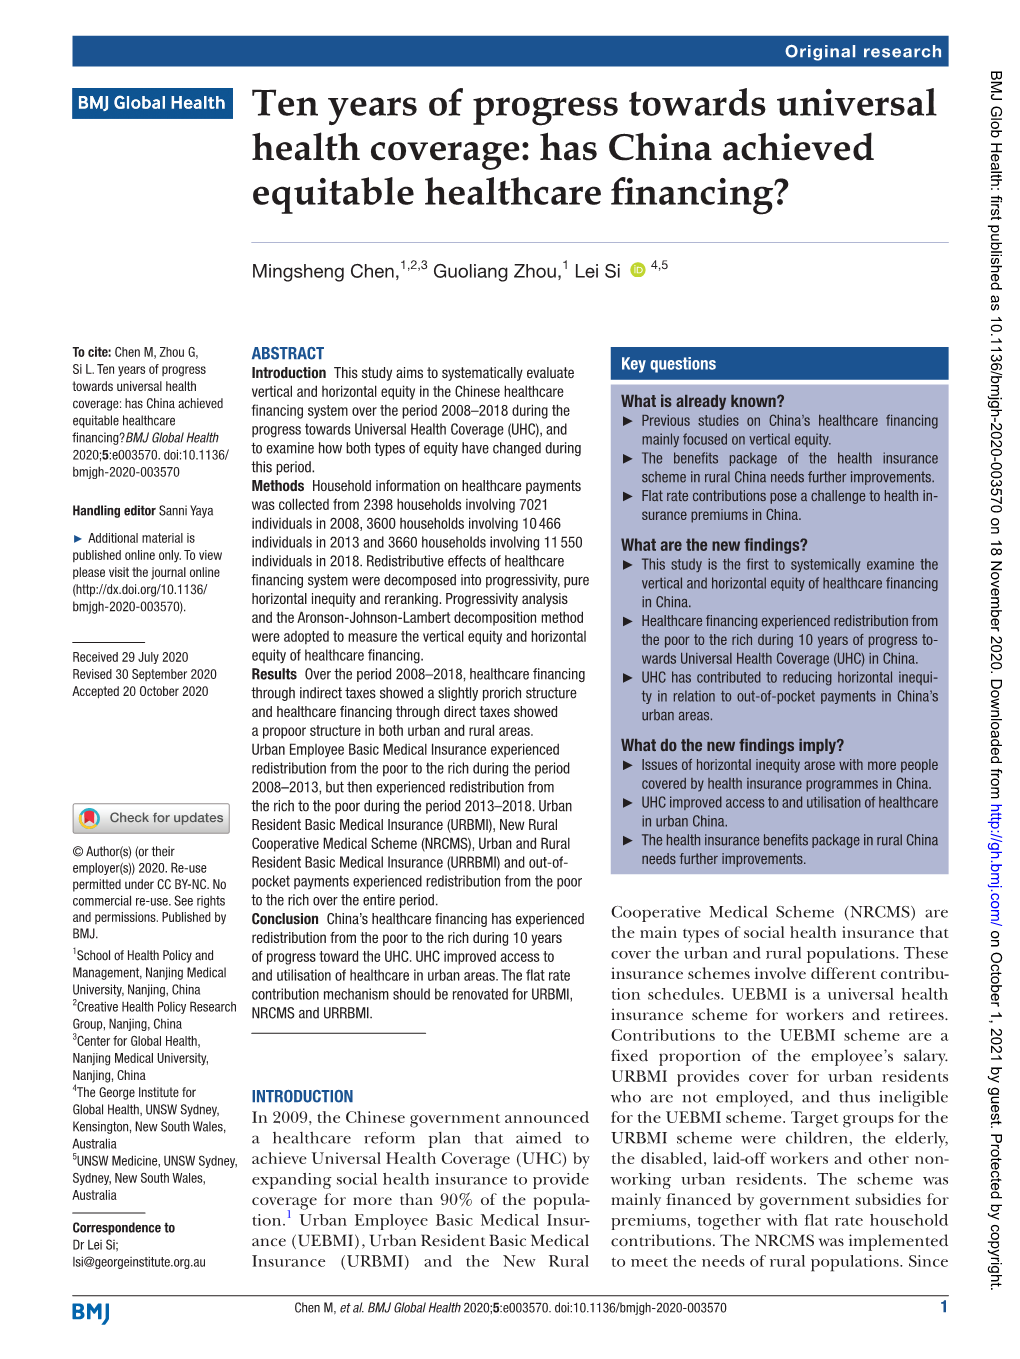 Ten Years of Progress Towards Universal Health Coverage: Has China Achieved Equitable Healthcare Financing?